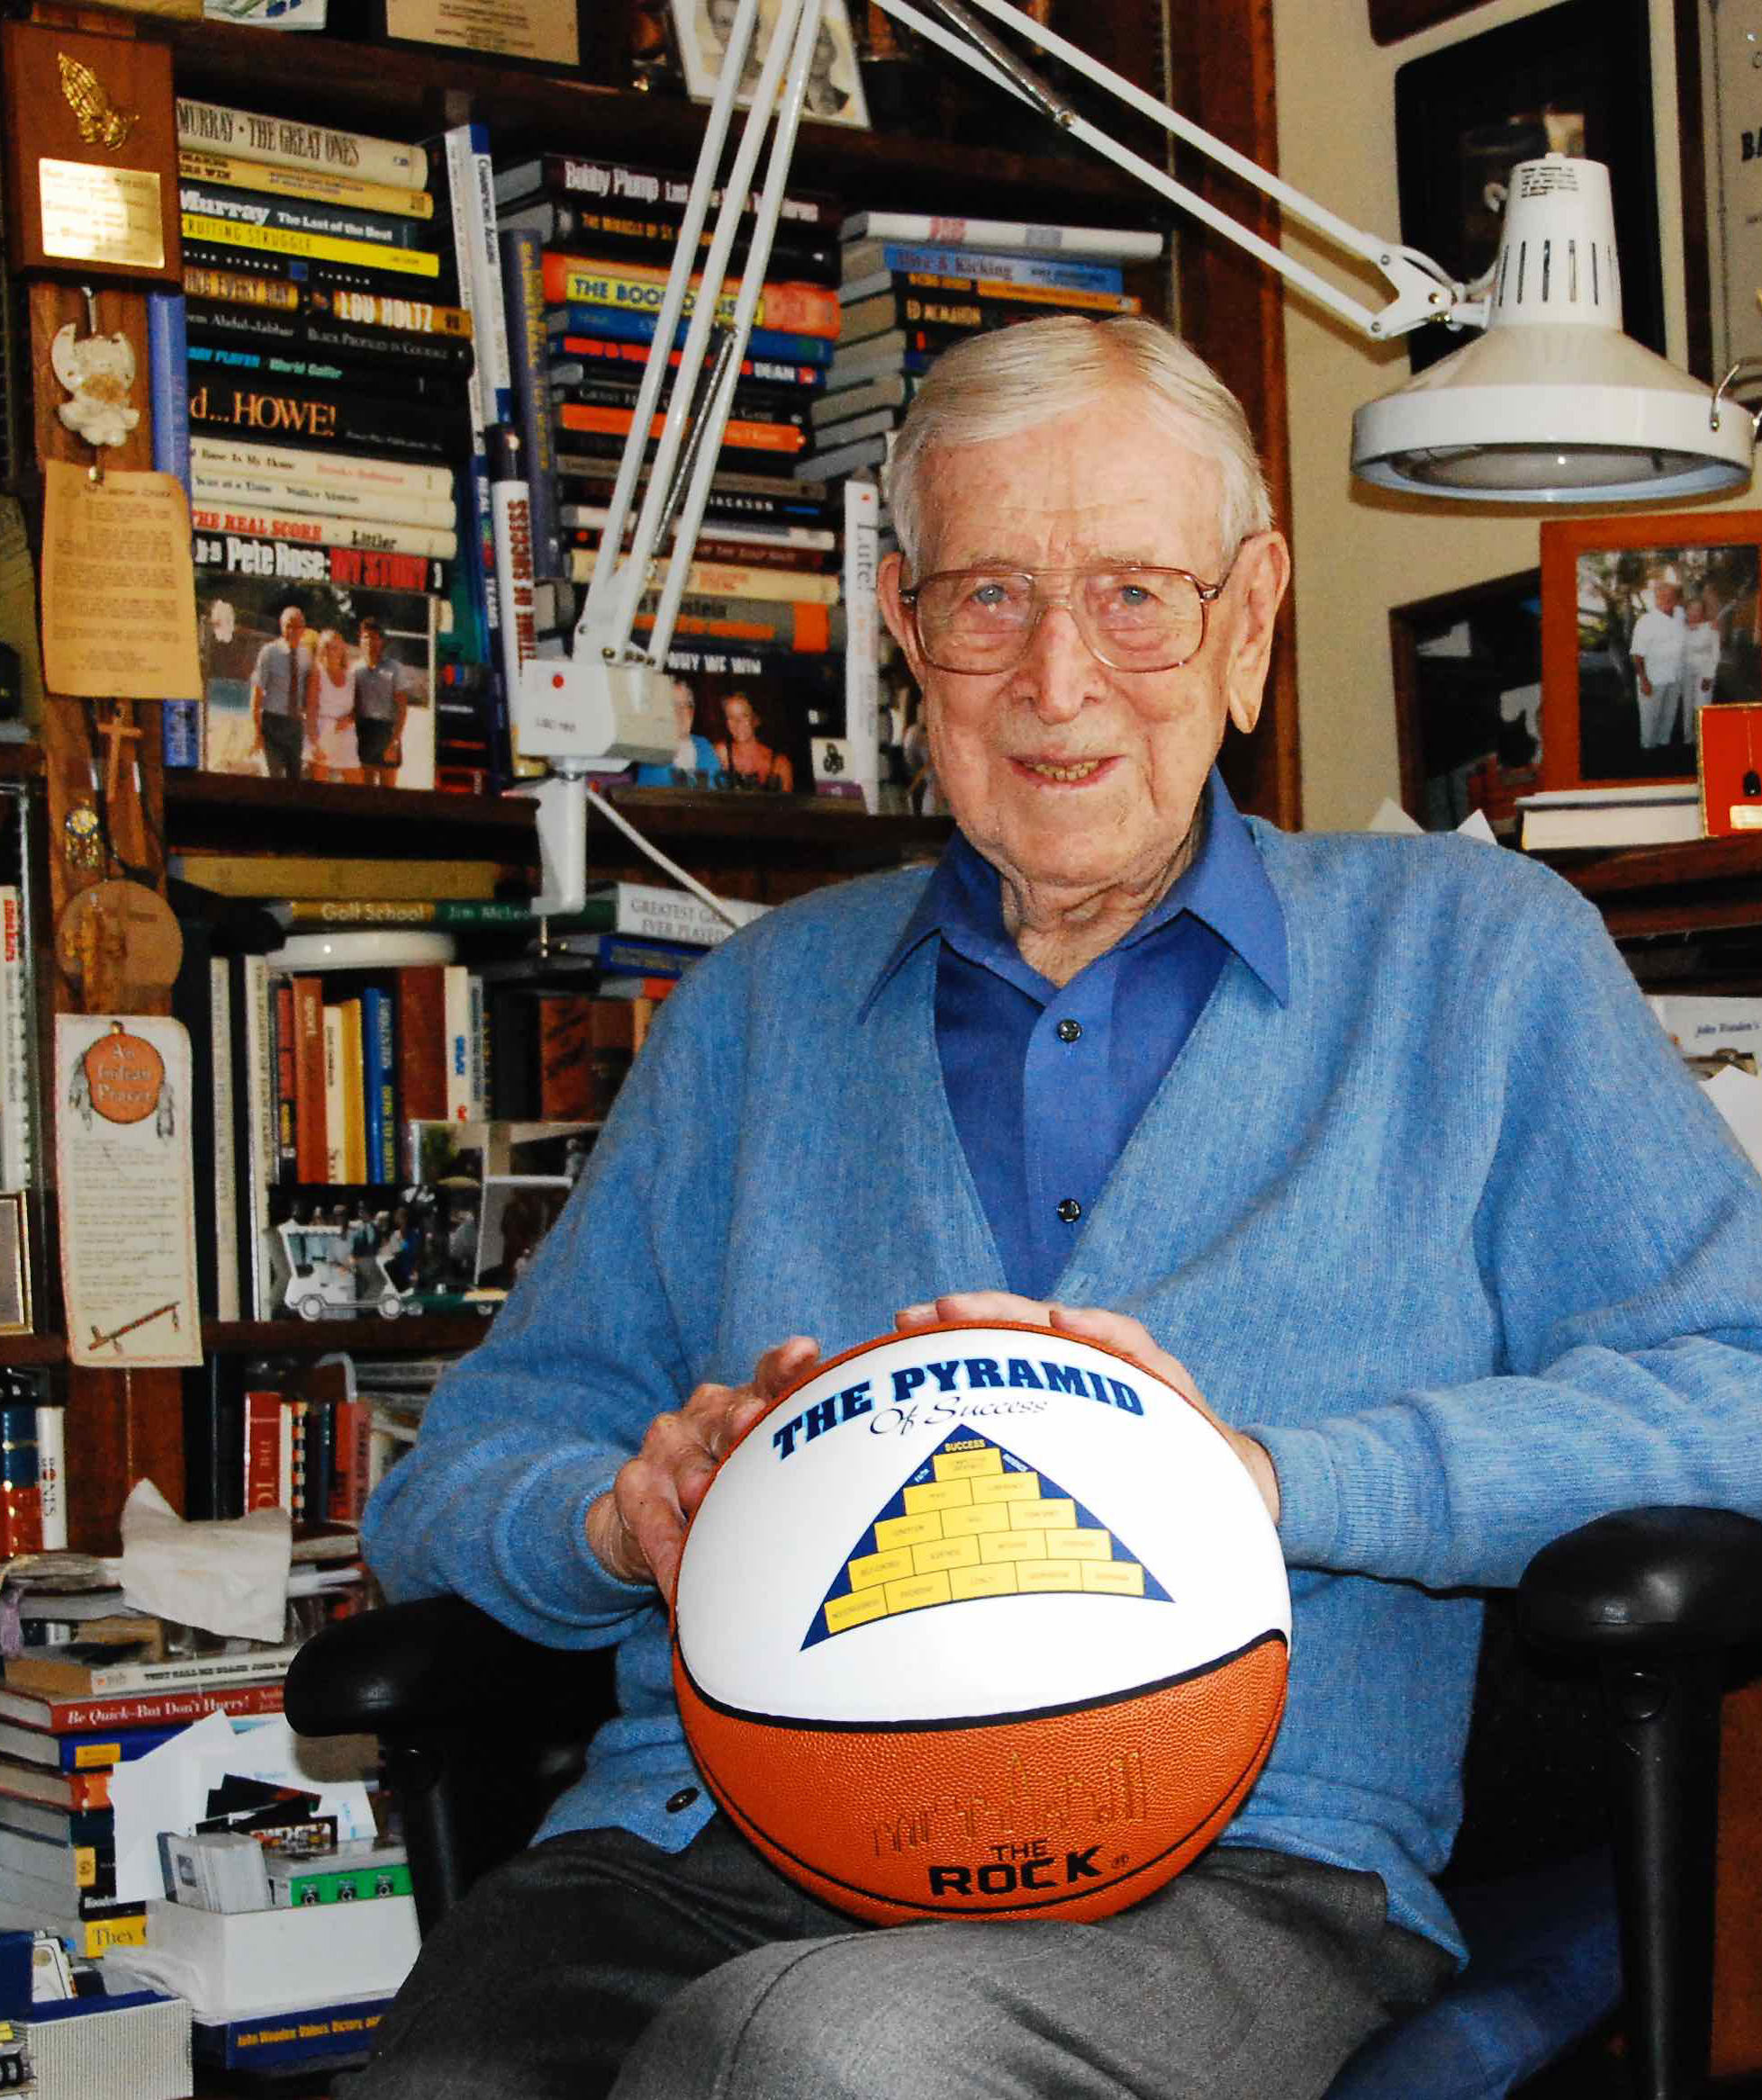 Coach Wooden iholding a basketball with his 'Pyramid of Success' printed on the ball.